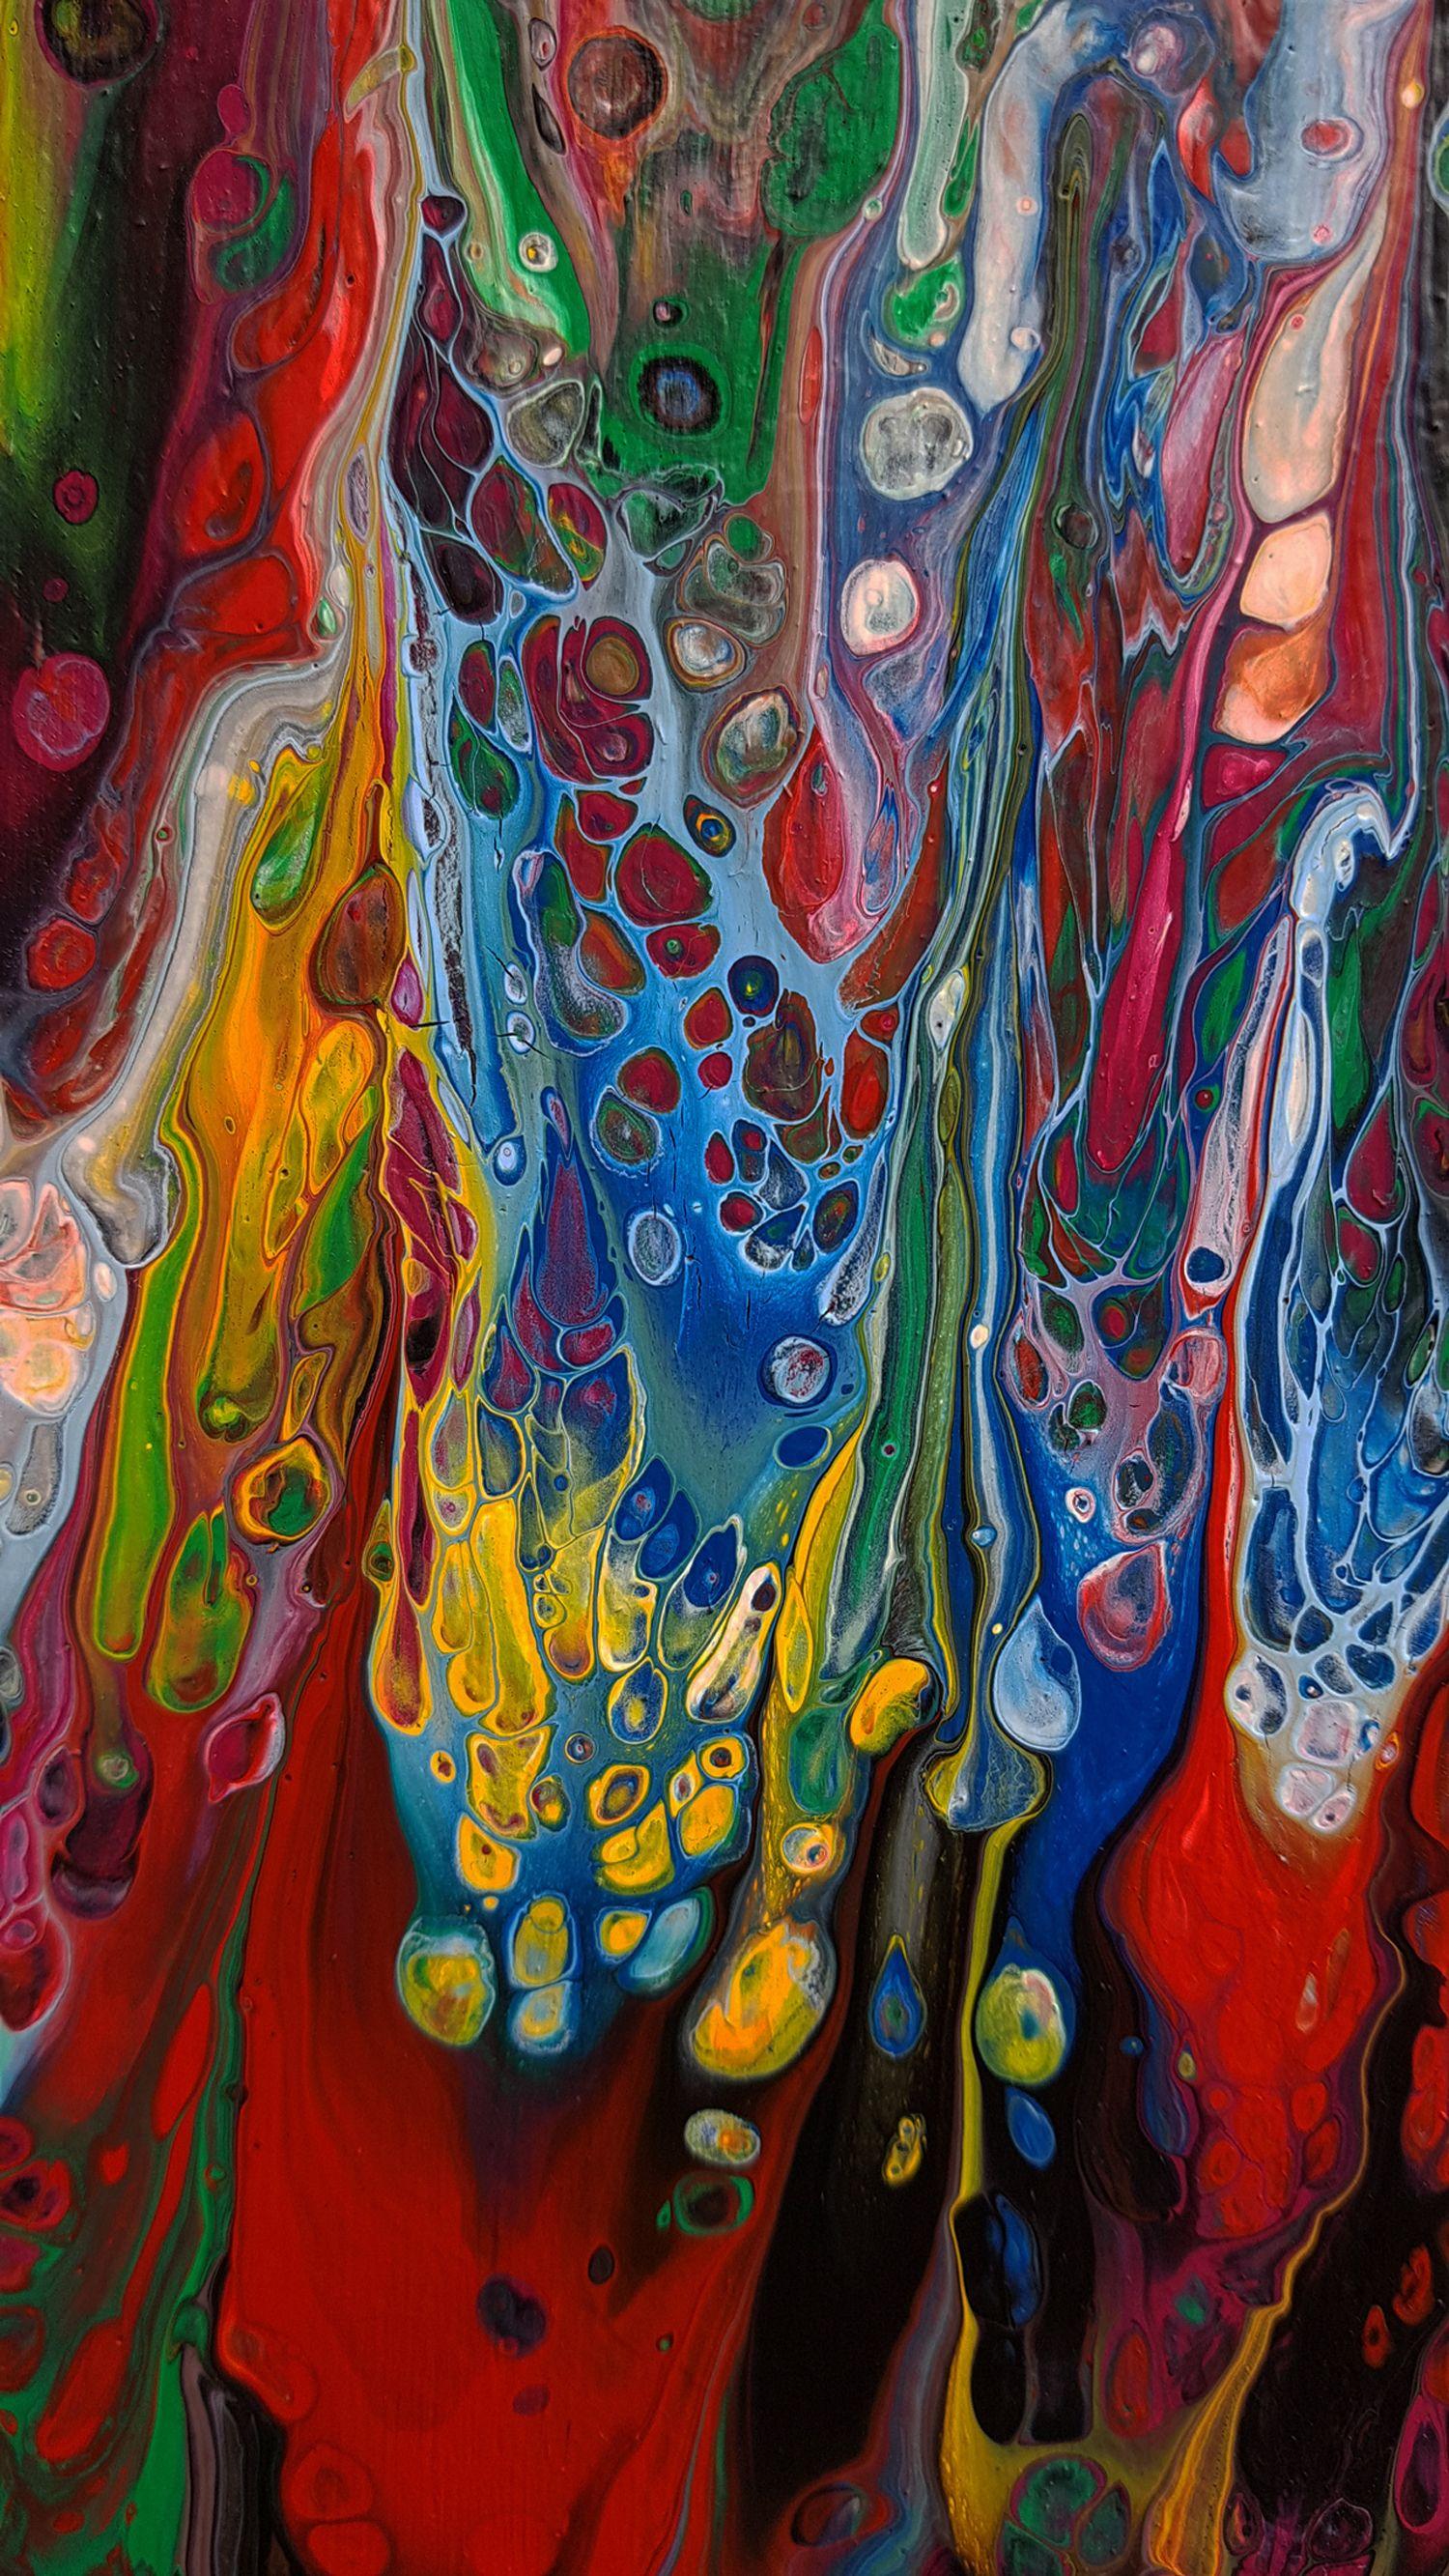 It is an extra-large abstract painting with exciting colours that expressively play off of each other in this one-of-a-kind statement piece with unique textures and fierce movement; vivid red, yellow, orange, green, blue, black, white, violet, and